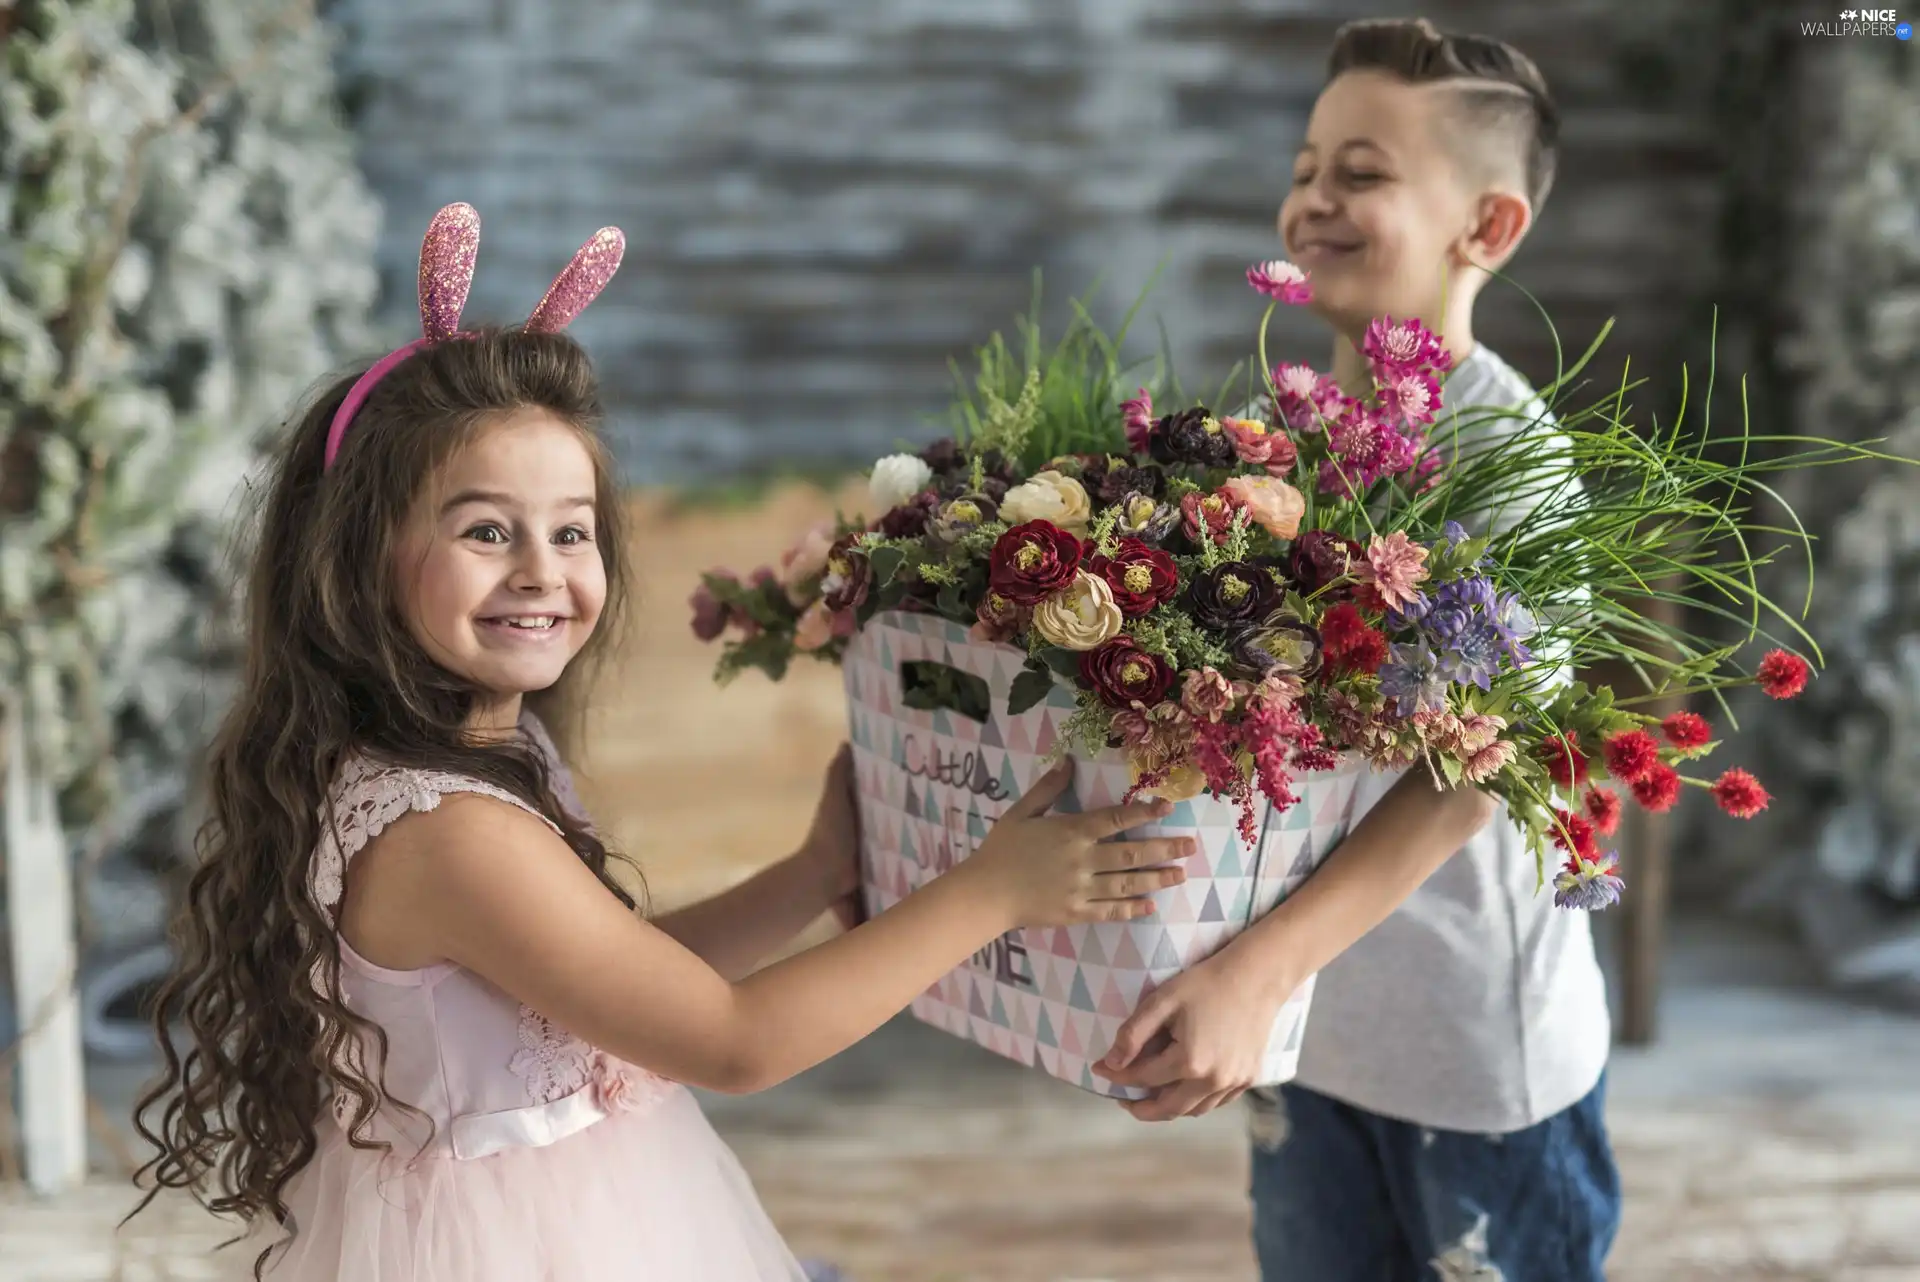 Flowers, color, basket, Hair, Longs, fuzzy, boy, Kids, background, Band, Smile, girl